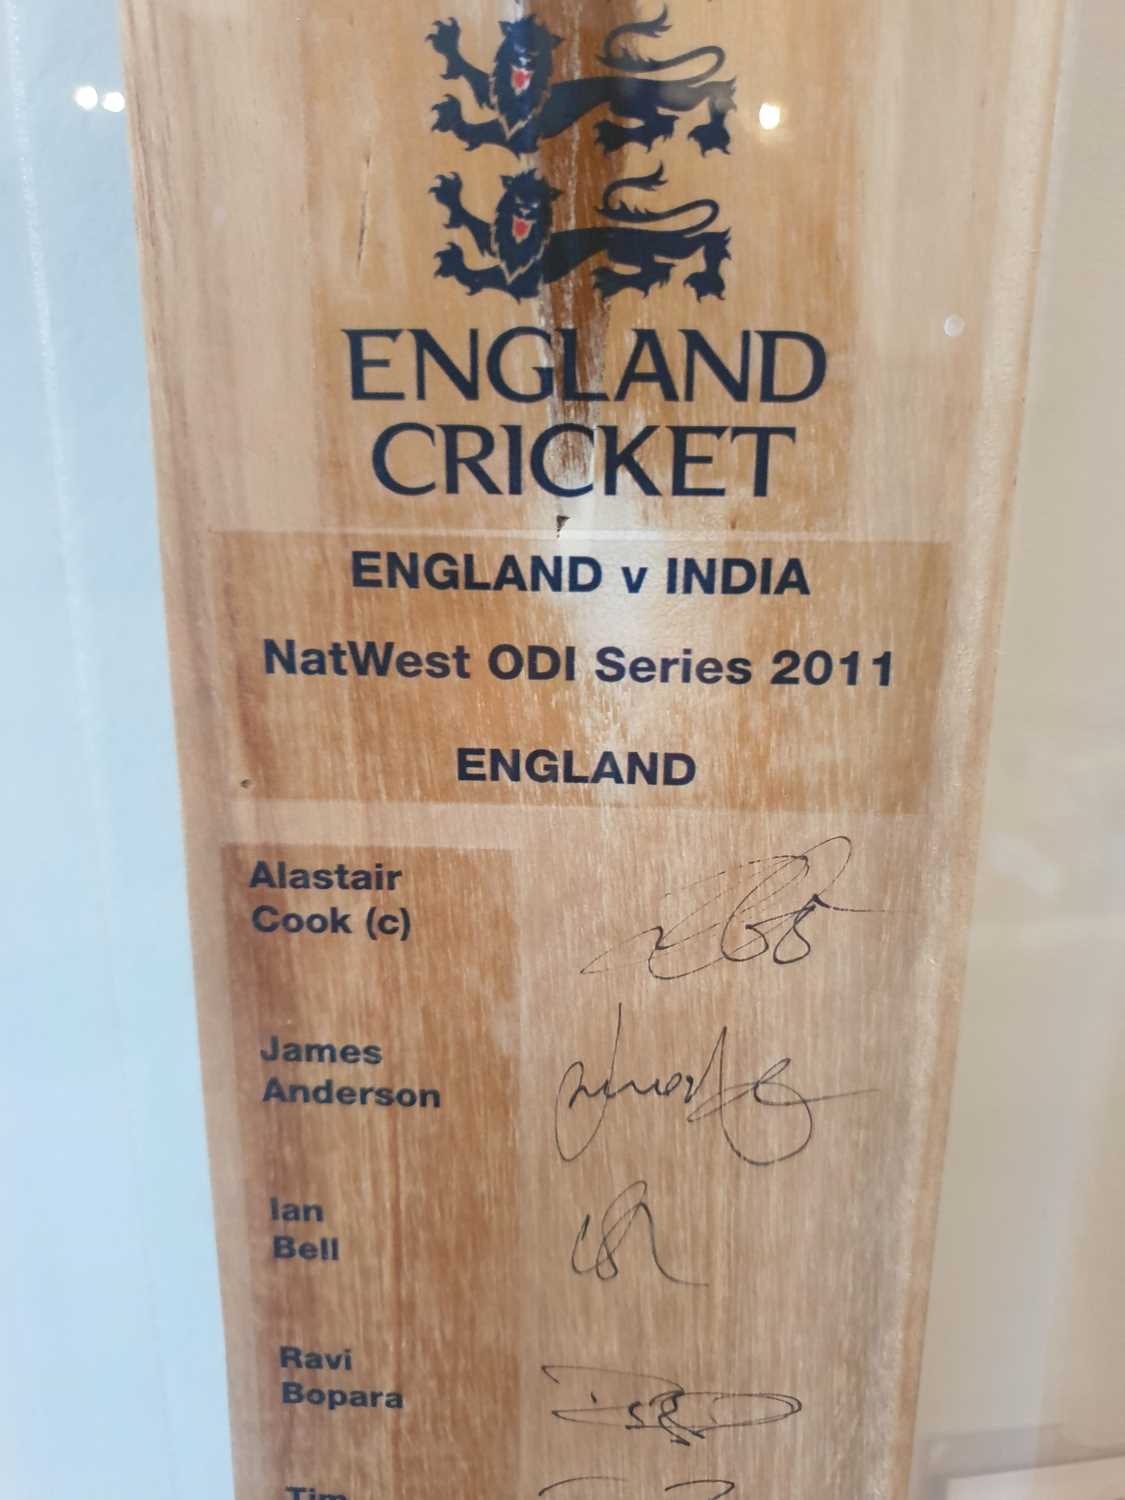 England v India NatWest ODI Series 2011 Cricket Bat Signed by the England Team The Cricket Bat is - Image 2 of 4